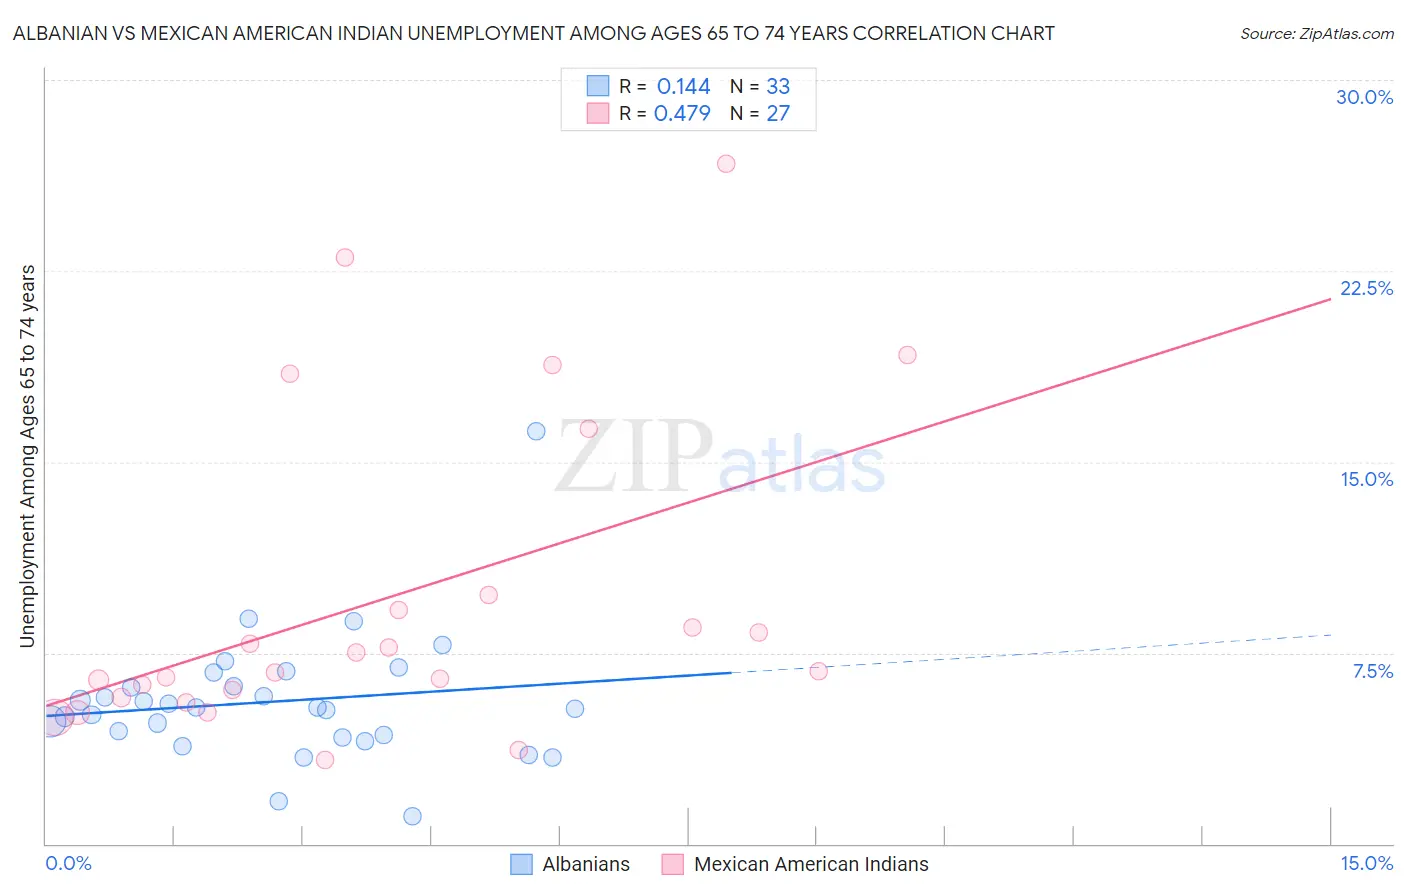 Albanian vs Mexican American Indian Unemployment Among Ages 65 to 74 years